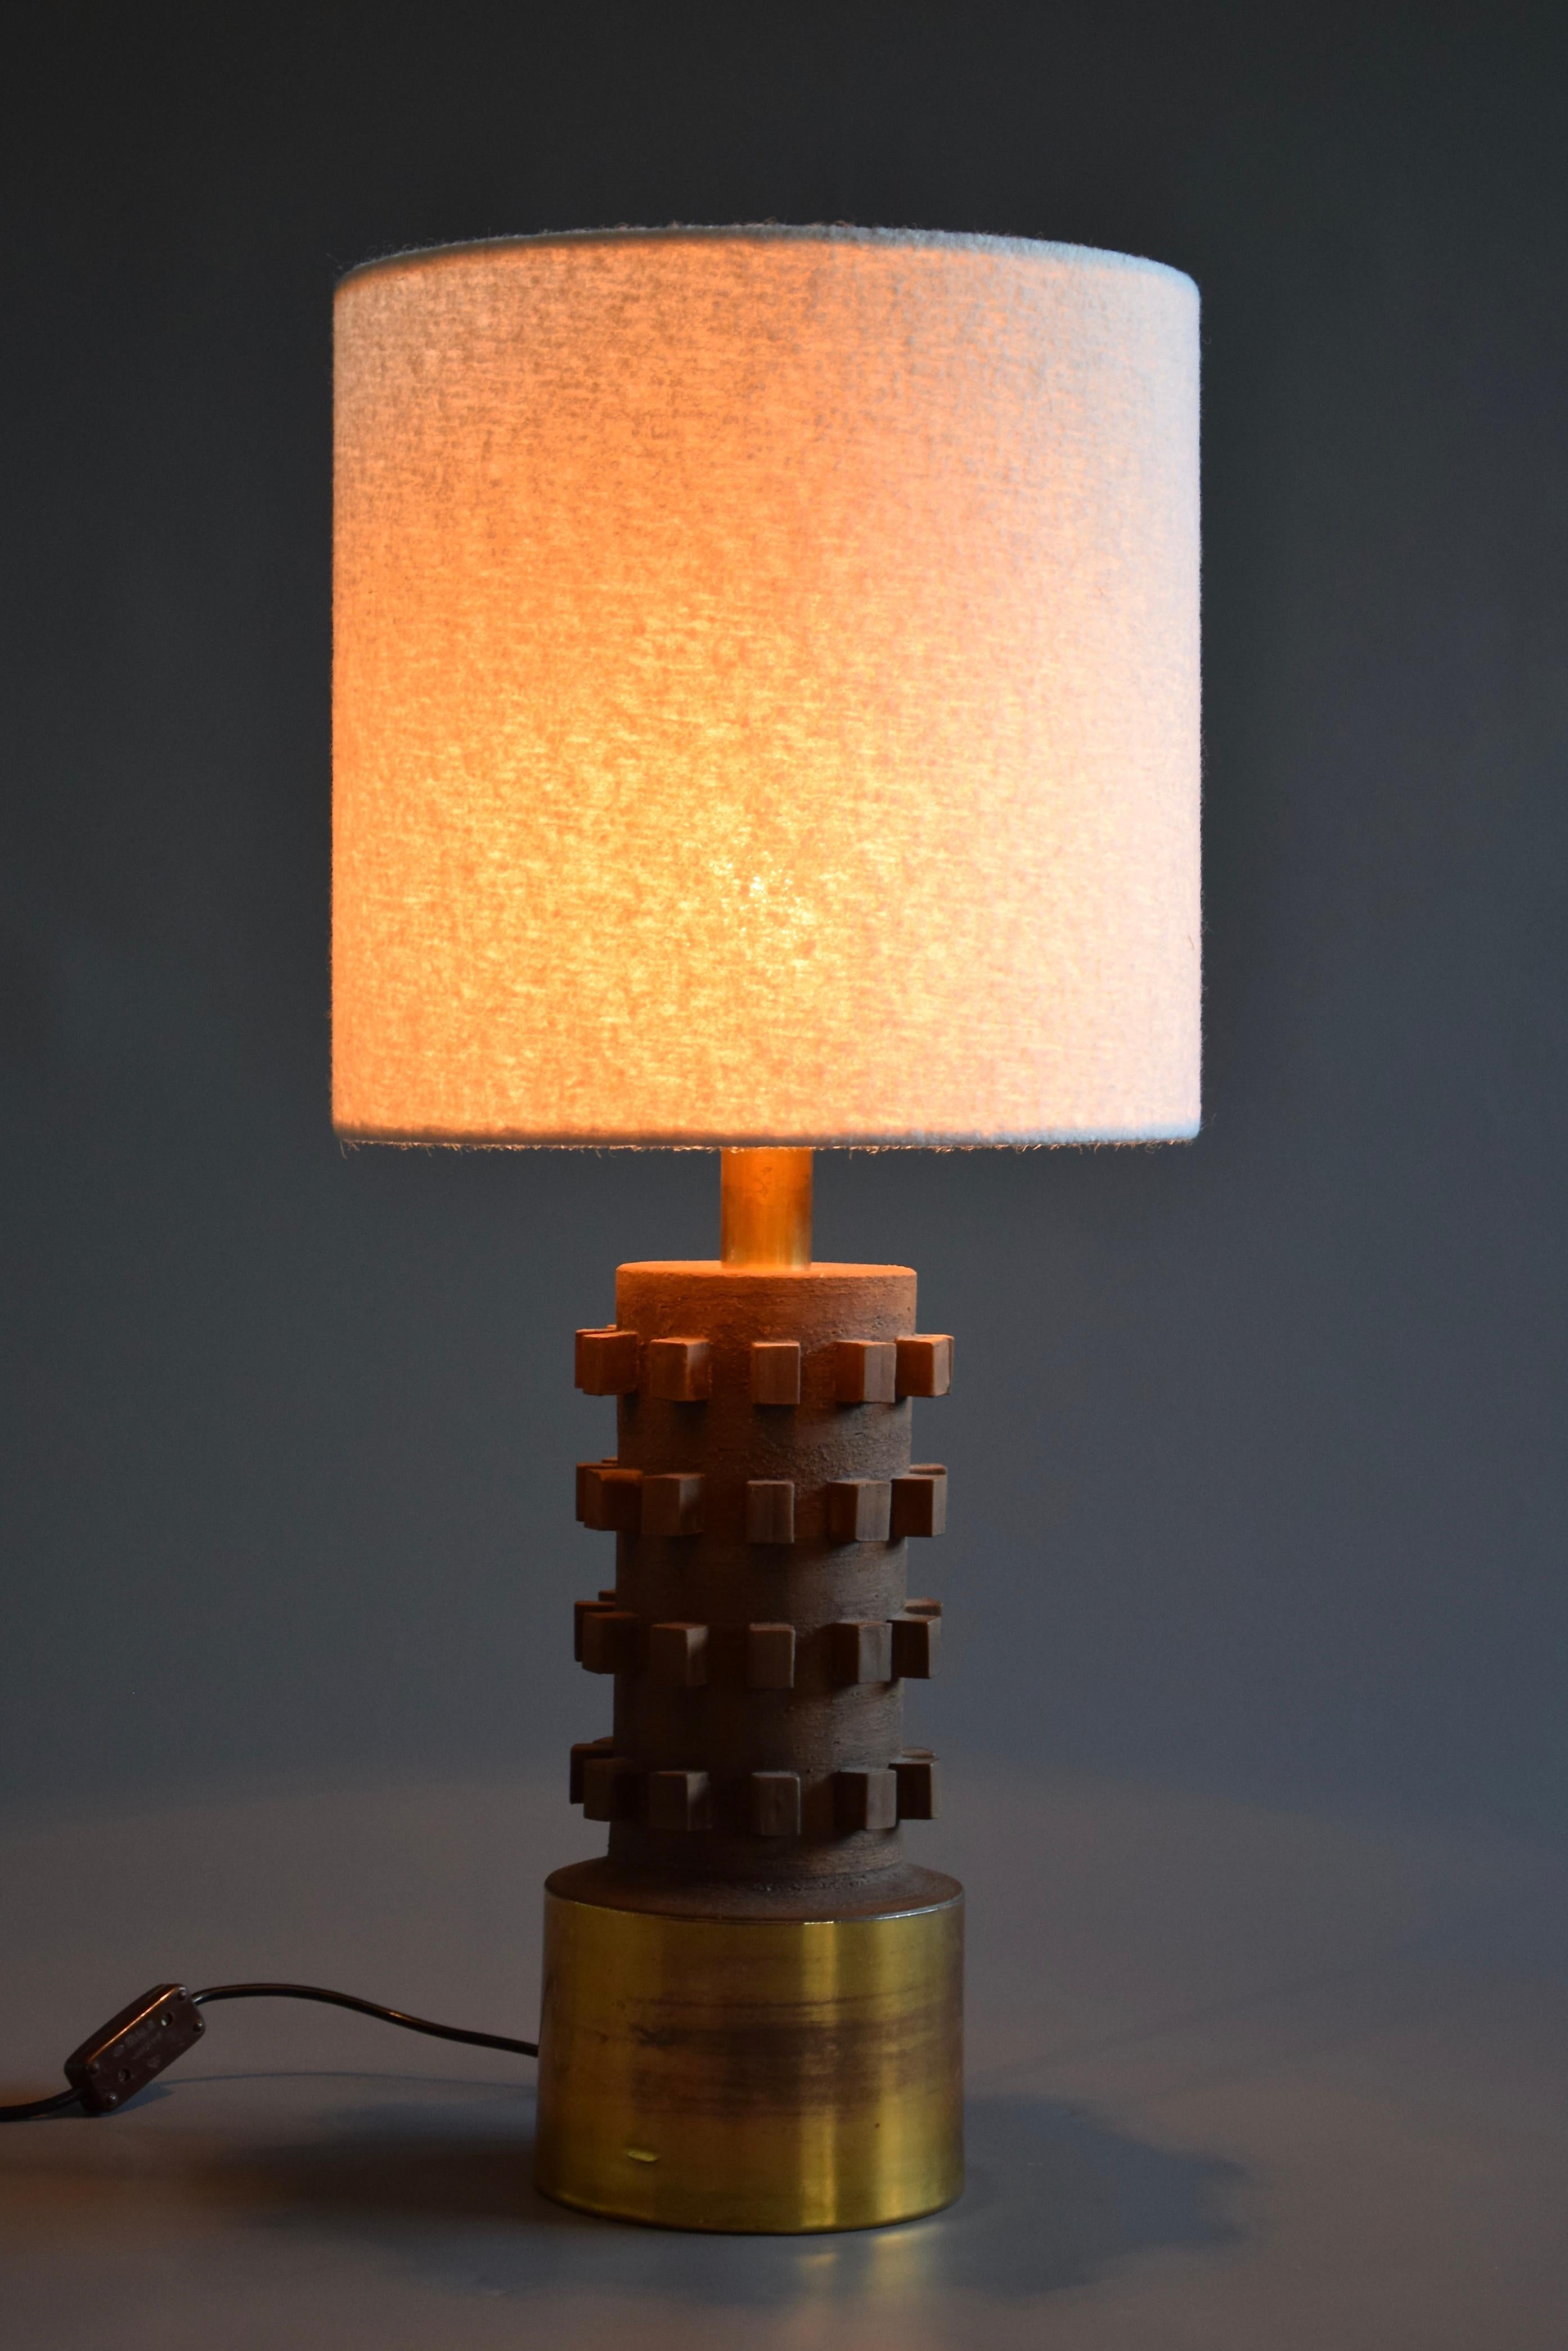 Beautiful one of a kind brown ceramic and gold plated ceramic Mid-Century Modern table lamp. The bouclé shade was recently custom made. 
The lamp is in perfect condition.
It will be shipped insured overseas in a custom made wooden crate. Cost of